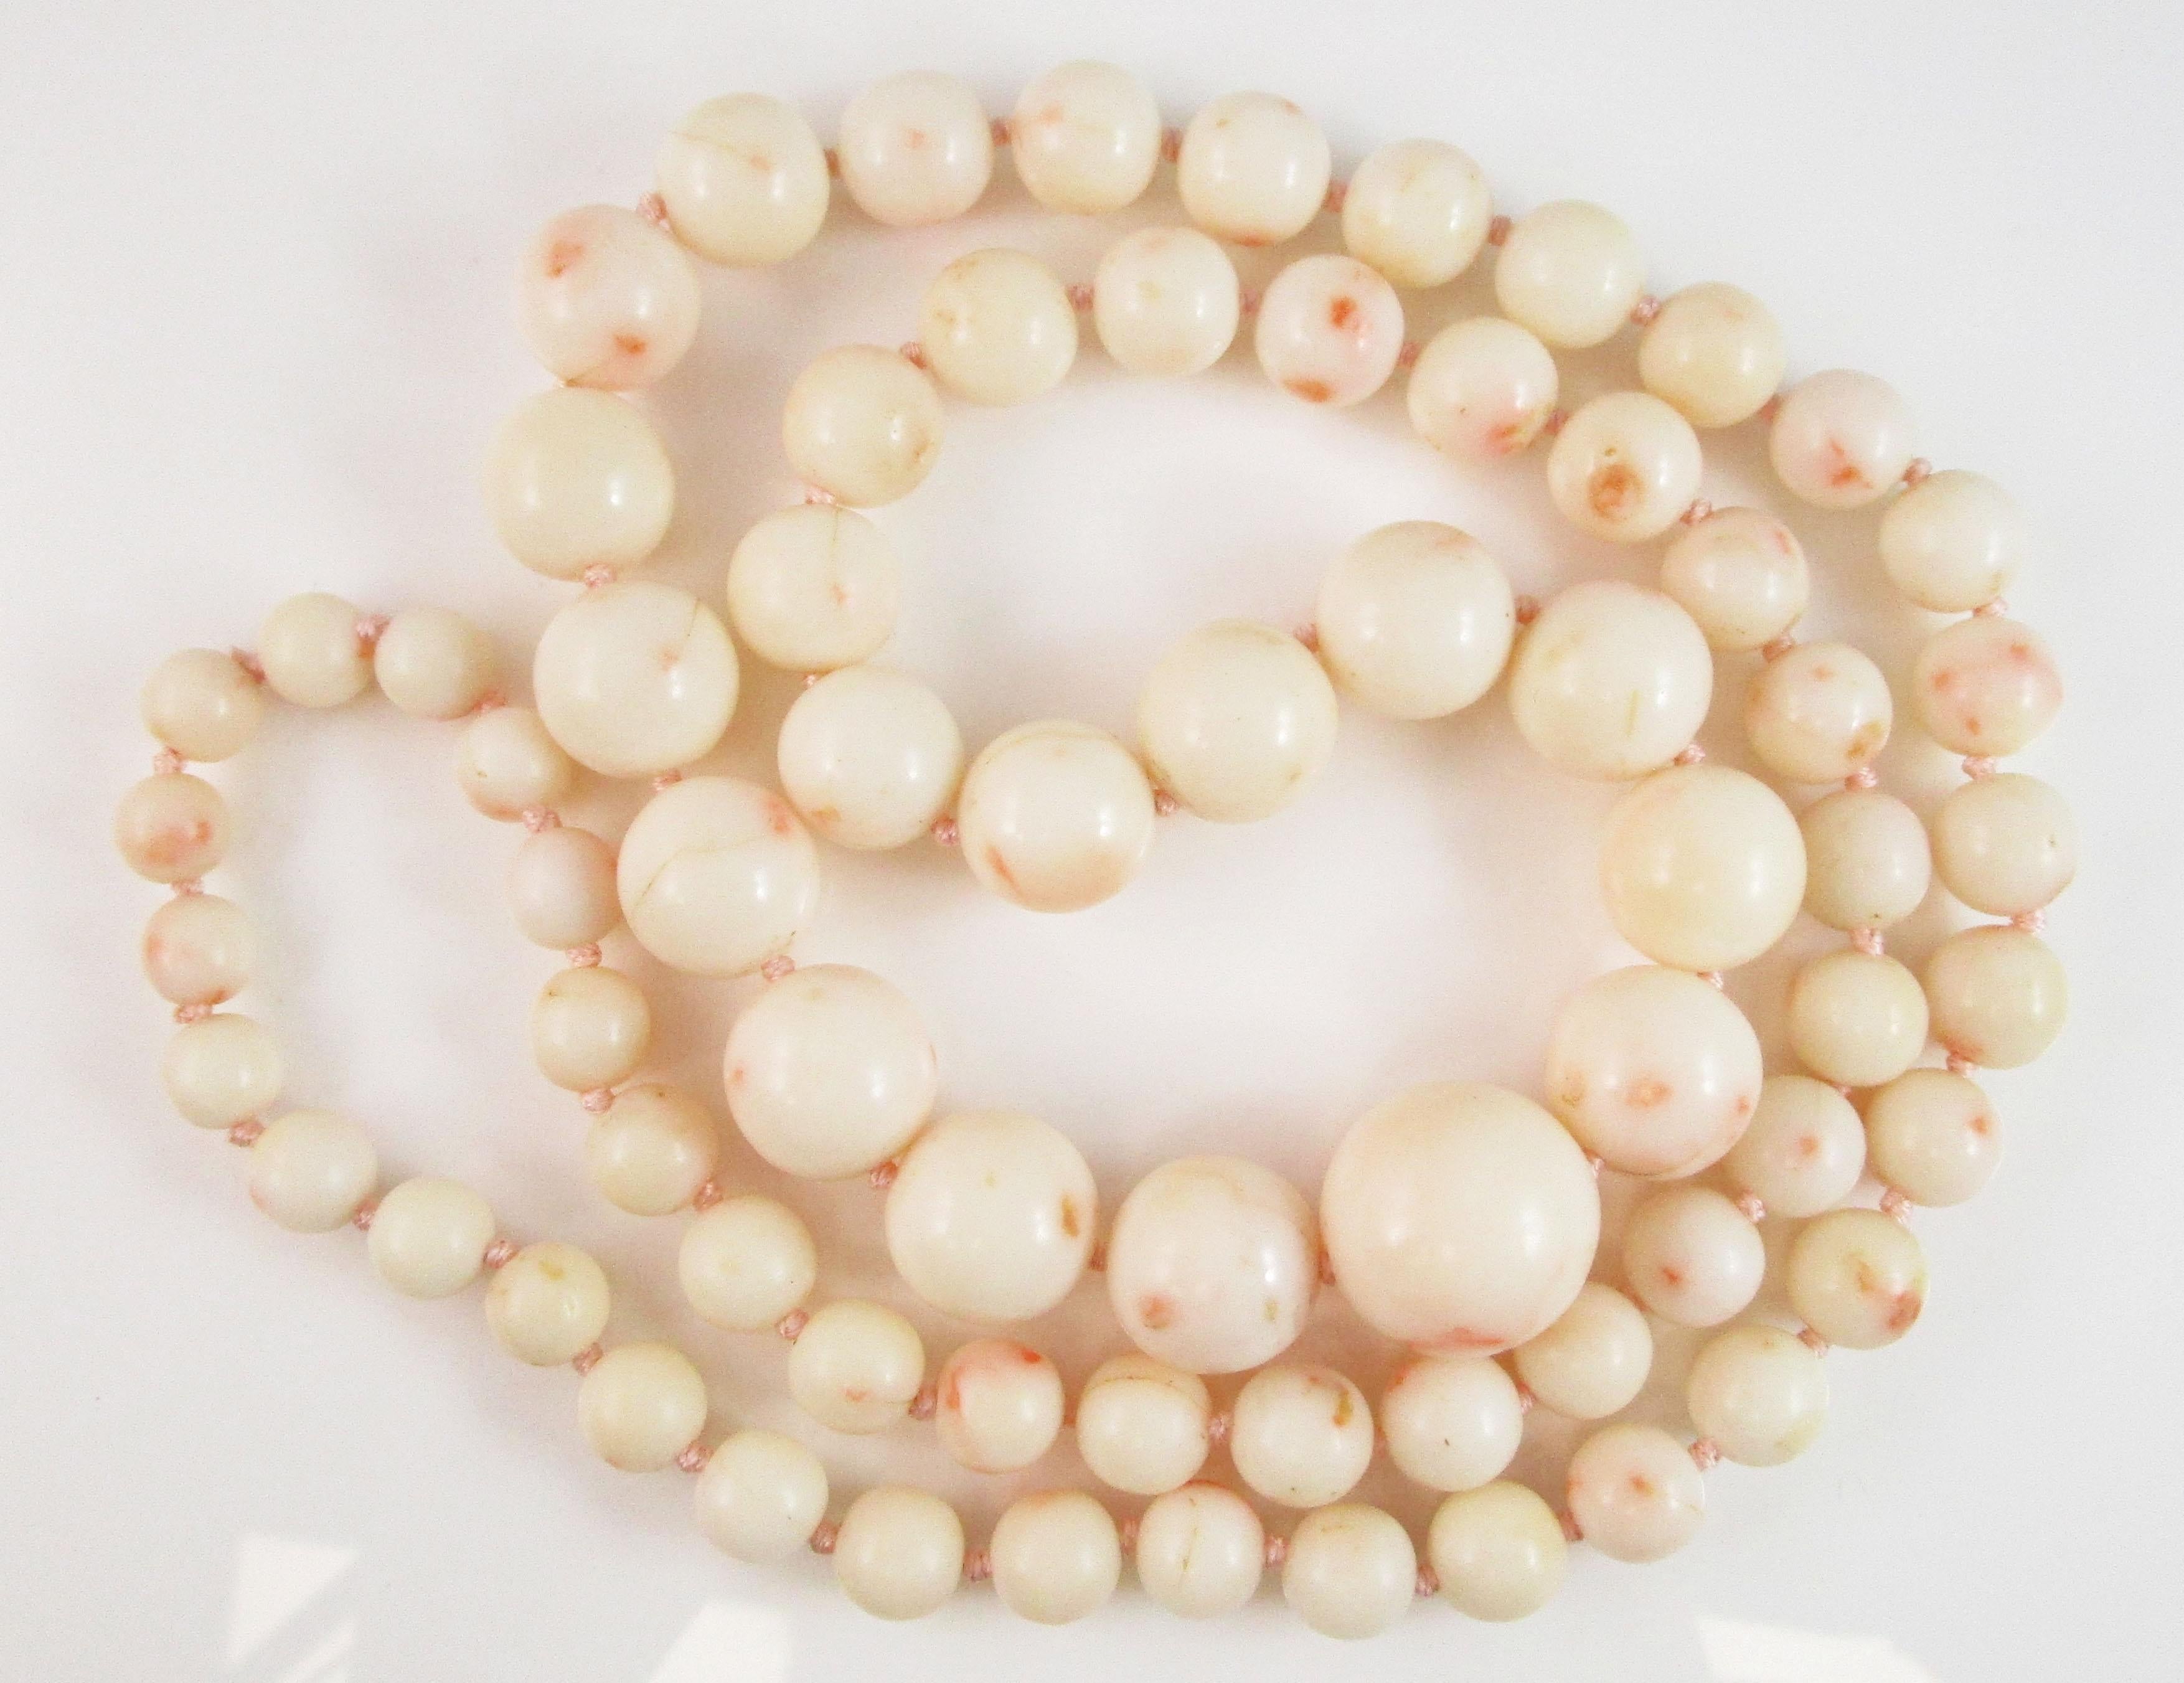 This is a breathtaking white coral necklace with a dramatic graduated layout in a bold long look! The coral is a soft white color accented with splotches of stunning peach and pink. The beads are in incredible shape and are well shaped and extremely